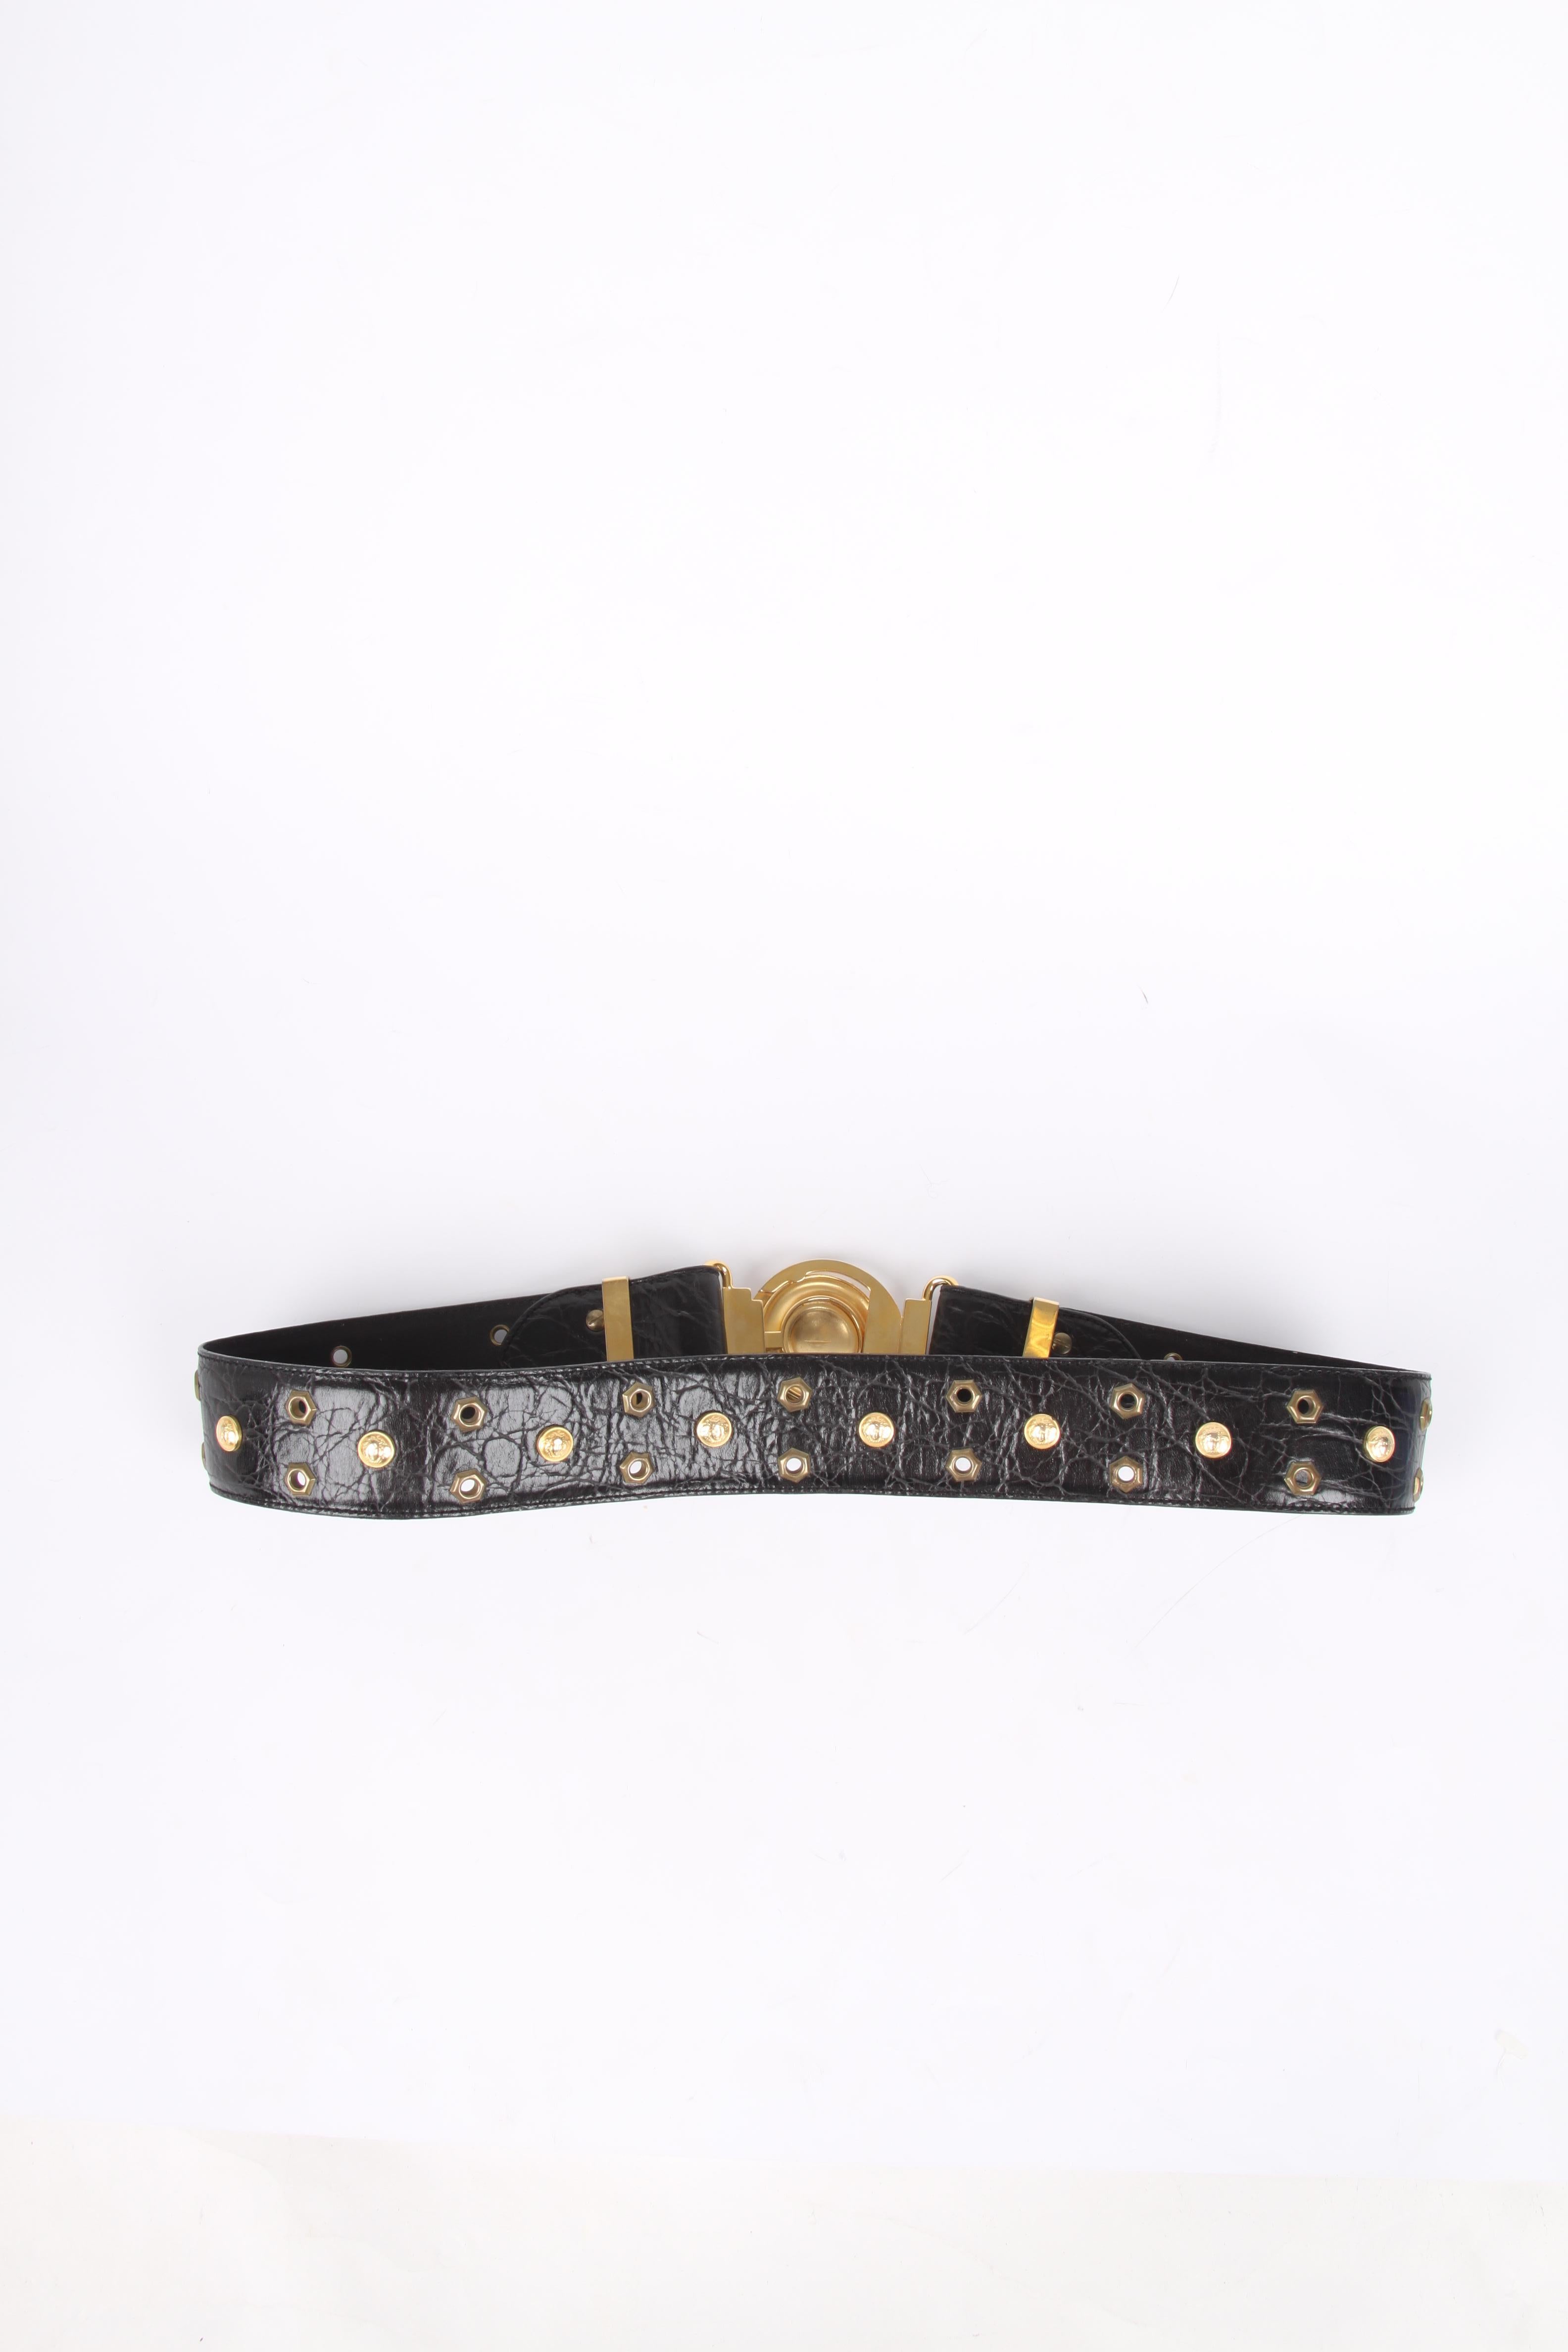 Another vintage juwel by Gianni Versace!

Black leather belt covered with ornaments, the buckle is of course decorated with the famous Medusa head. The belt has stamped size 95 centimeters and is adjustable.

In very good vintage condition,